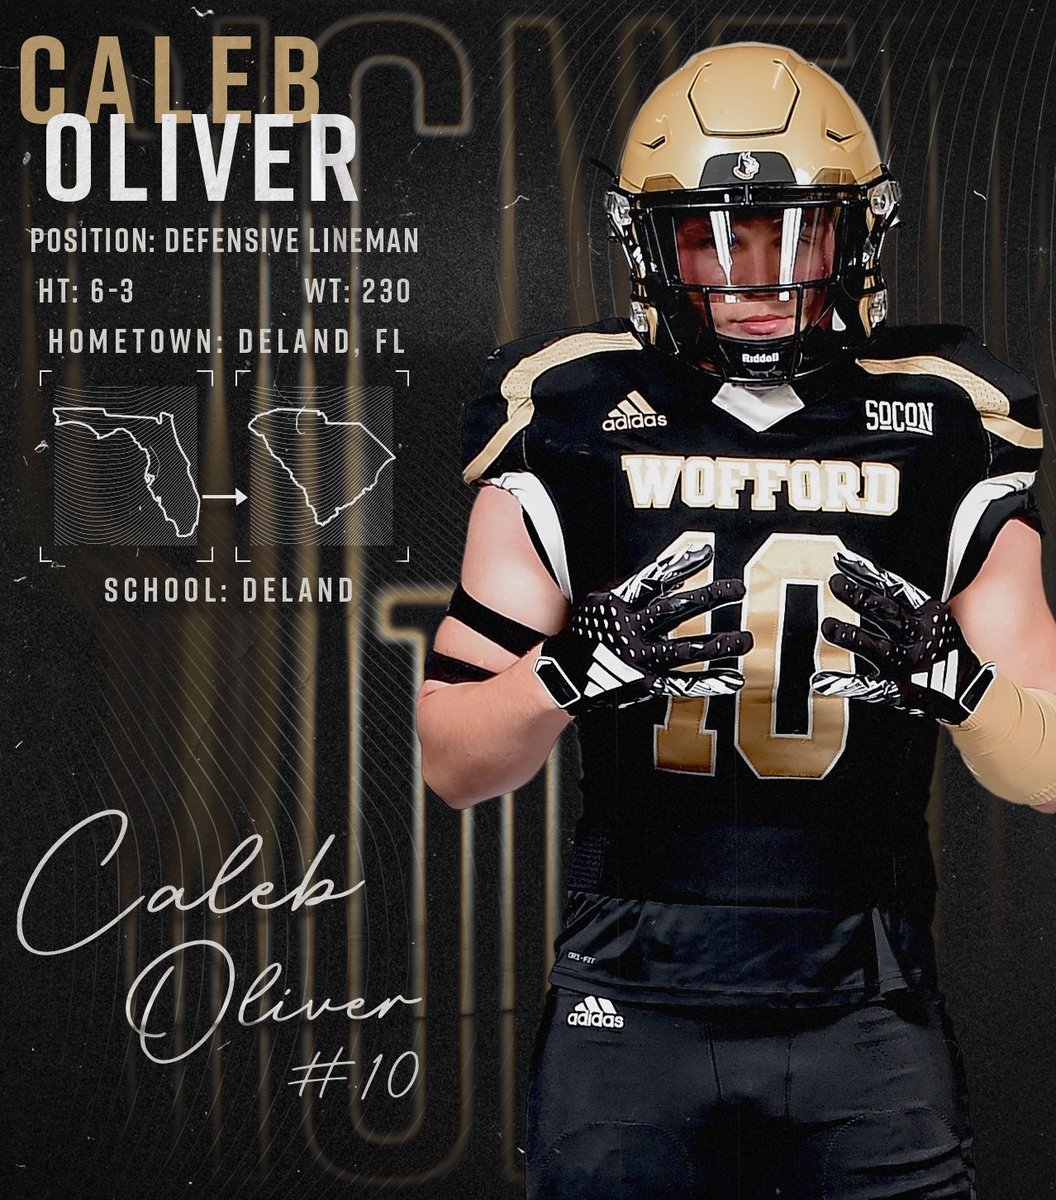 Adding to the defensive line this morning with Caleb Oliver from DeLand, Florida!